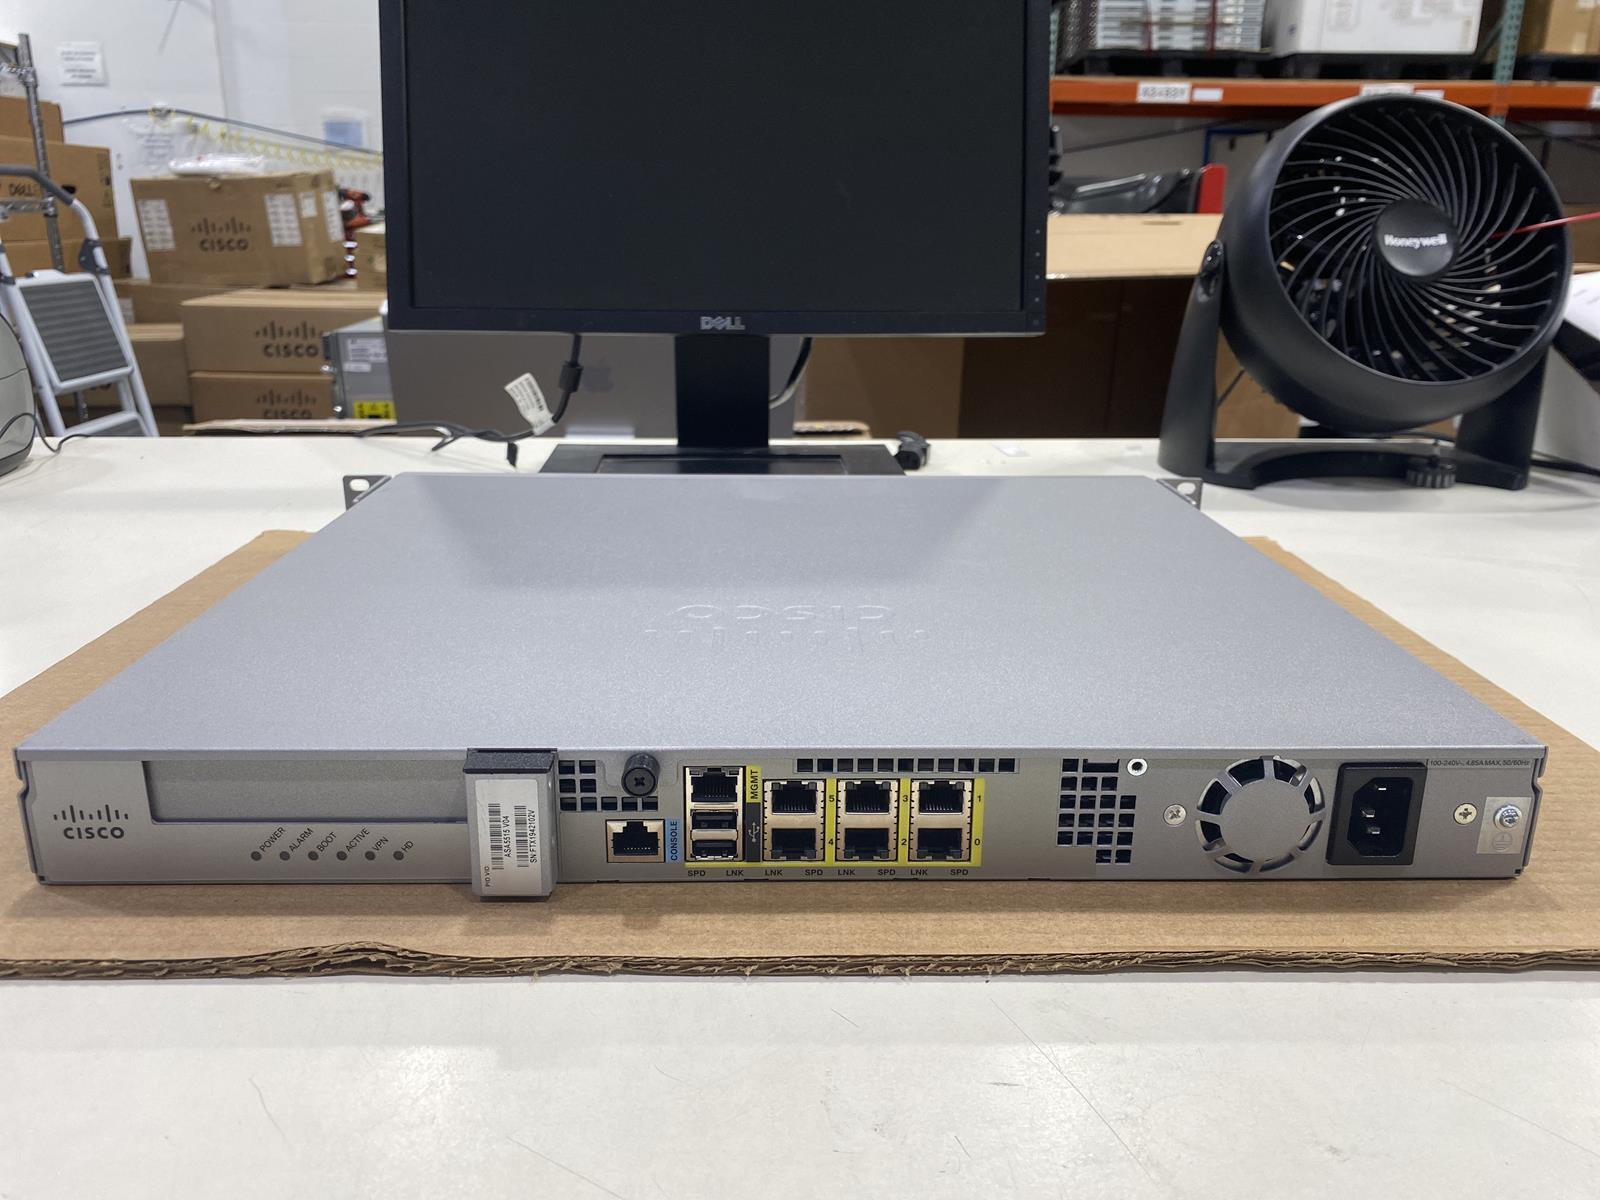 Cisco ASA5515-X Adaptive Security Appliance with power cable